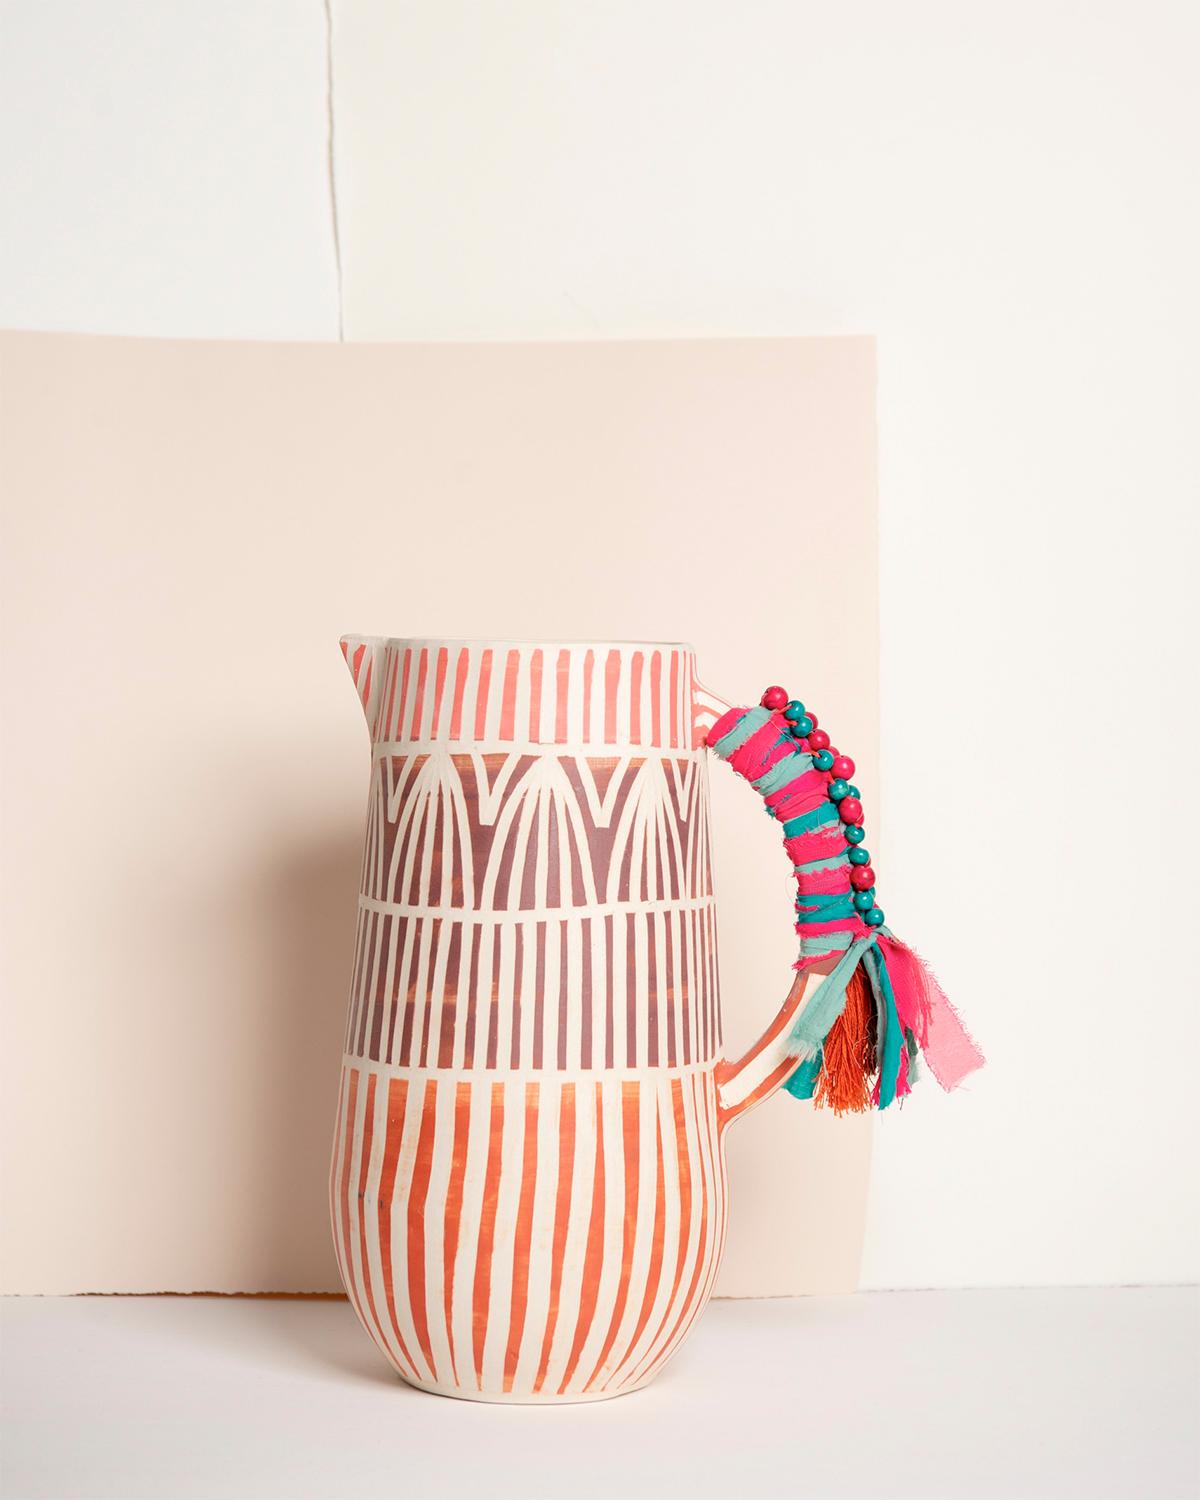 A handmade jug for your next soiree
The Fest Handmade Ceramic Jug is a whimsical party must-have. Crafted from white ceramic with red glaze and delicate handmade details like beads and cotton thread, this jug also features a striped texture. Great